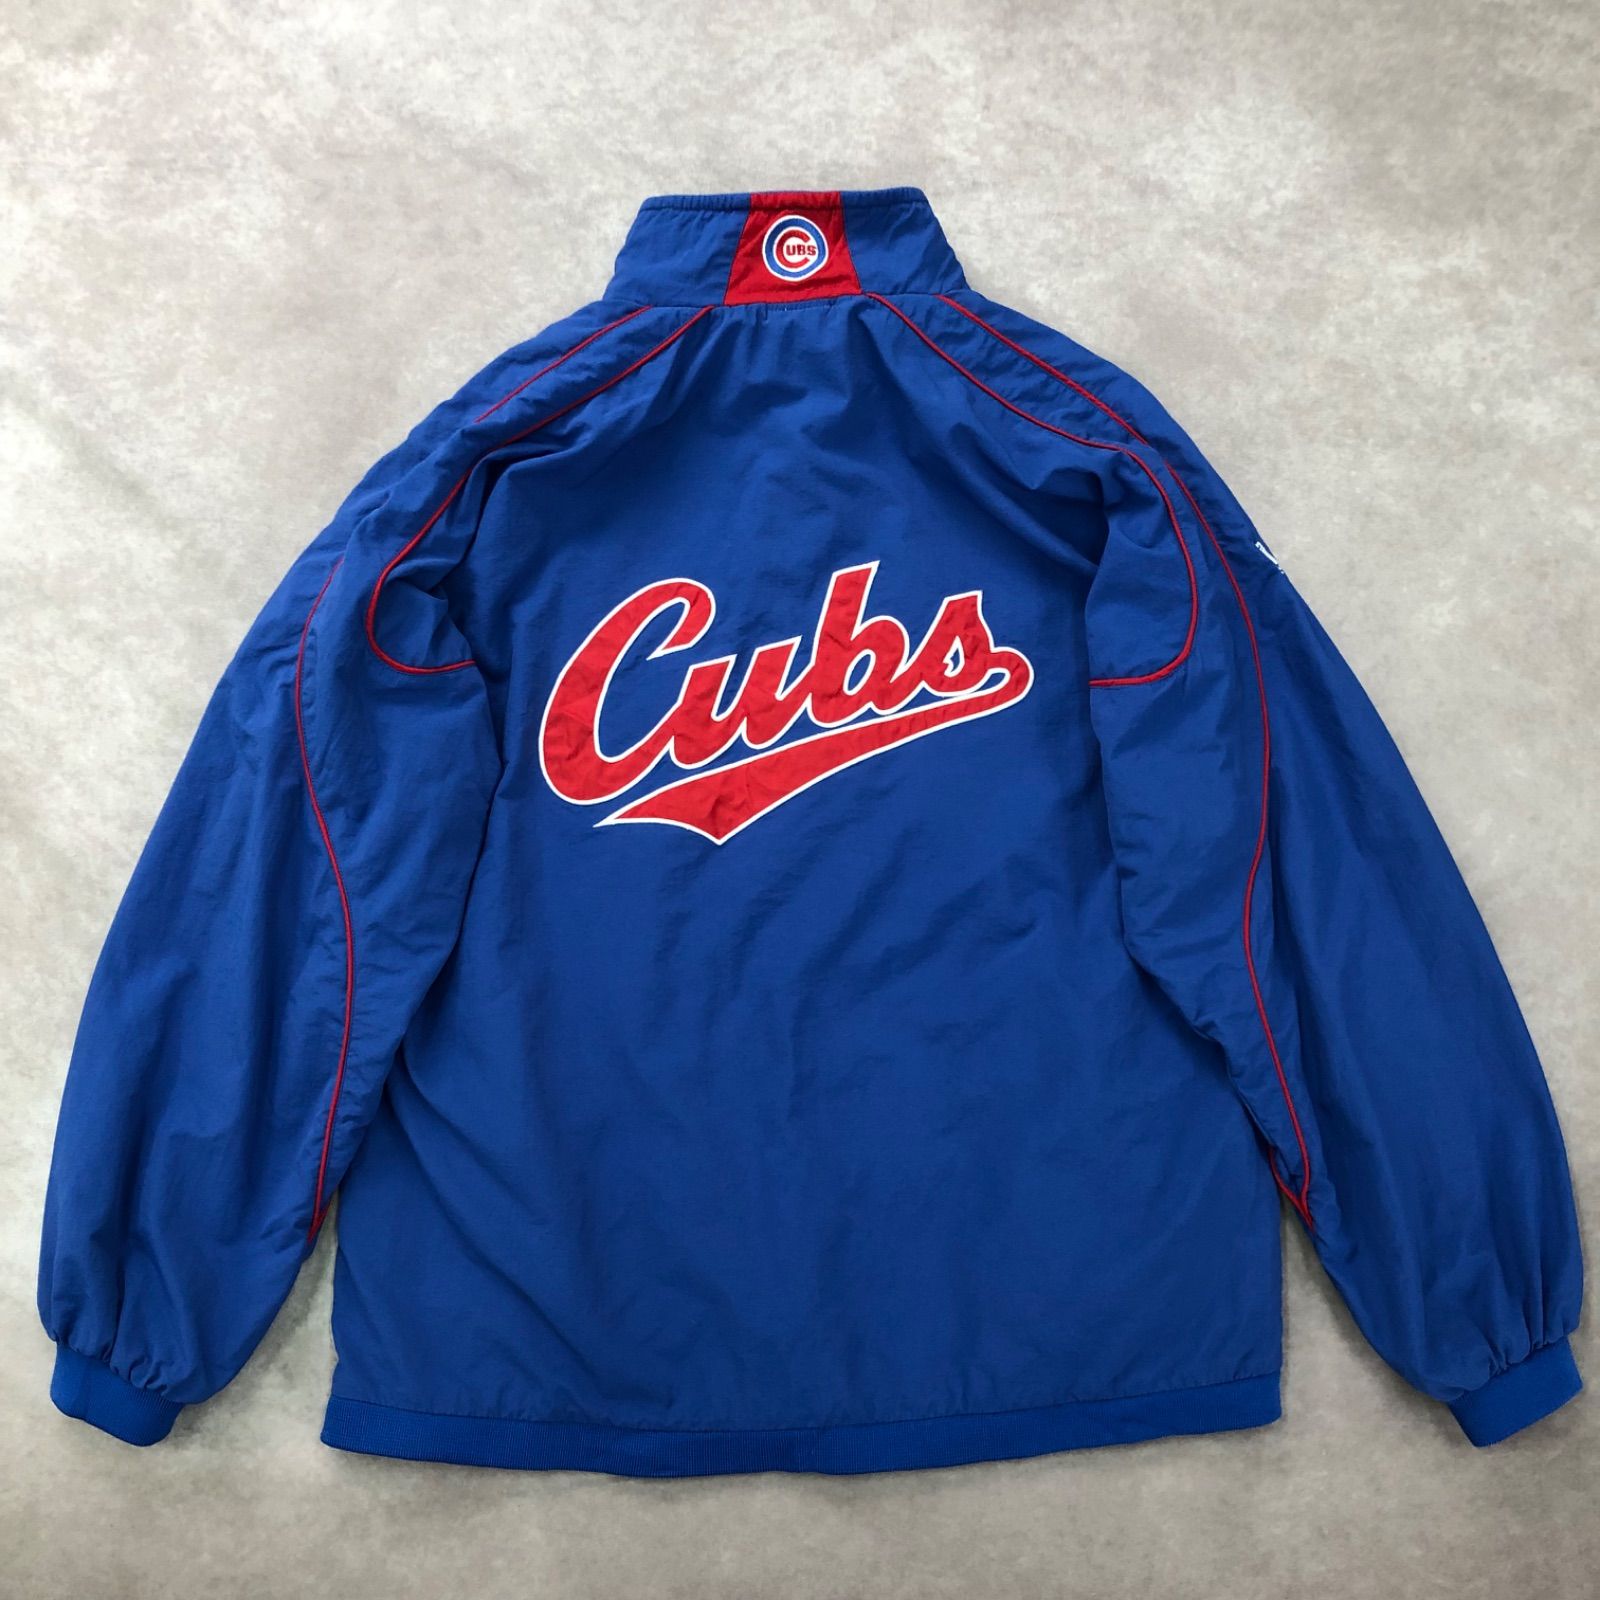 CHICAGO CUBS majestic MLB シカゴ カブス スタジャン - ナイロン 